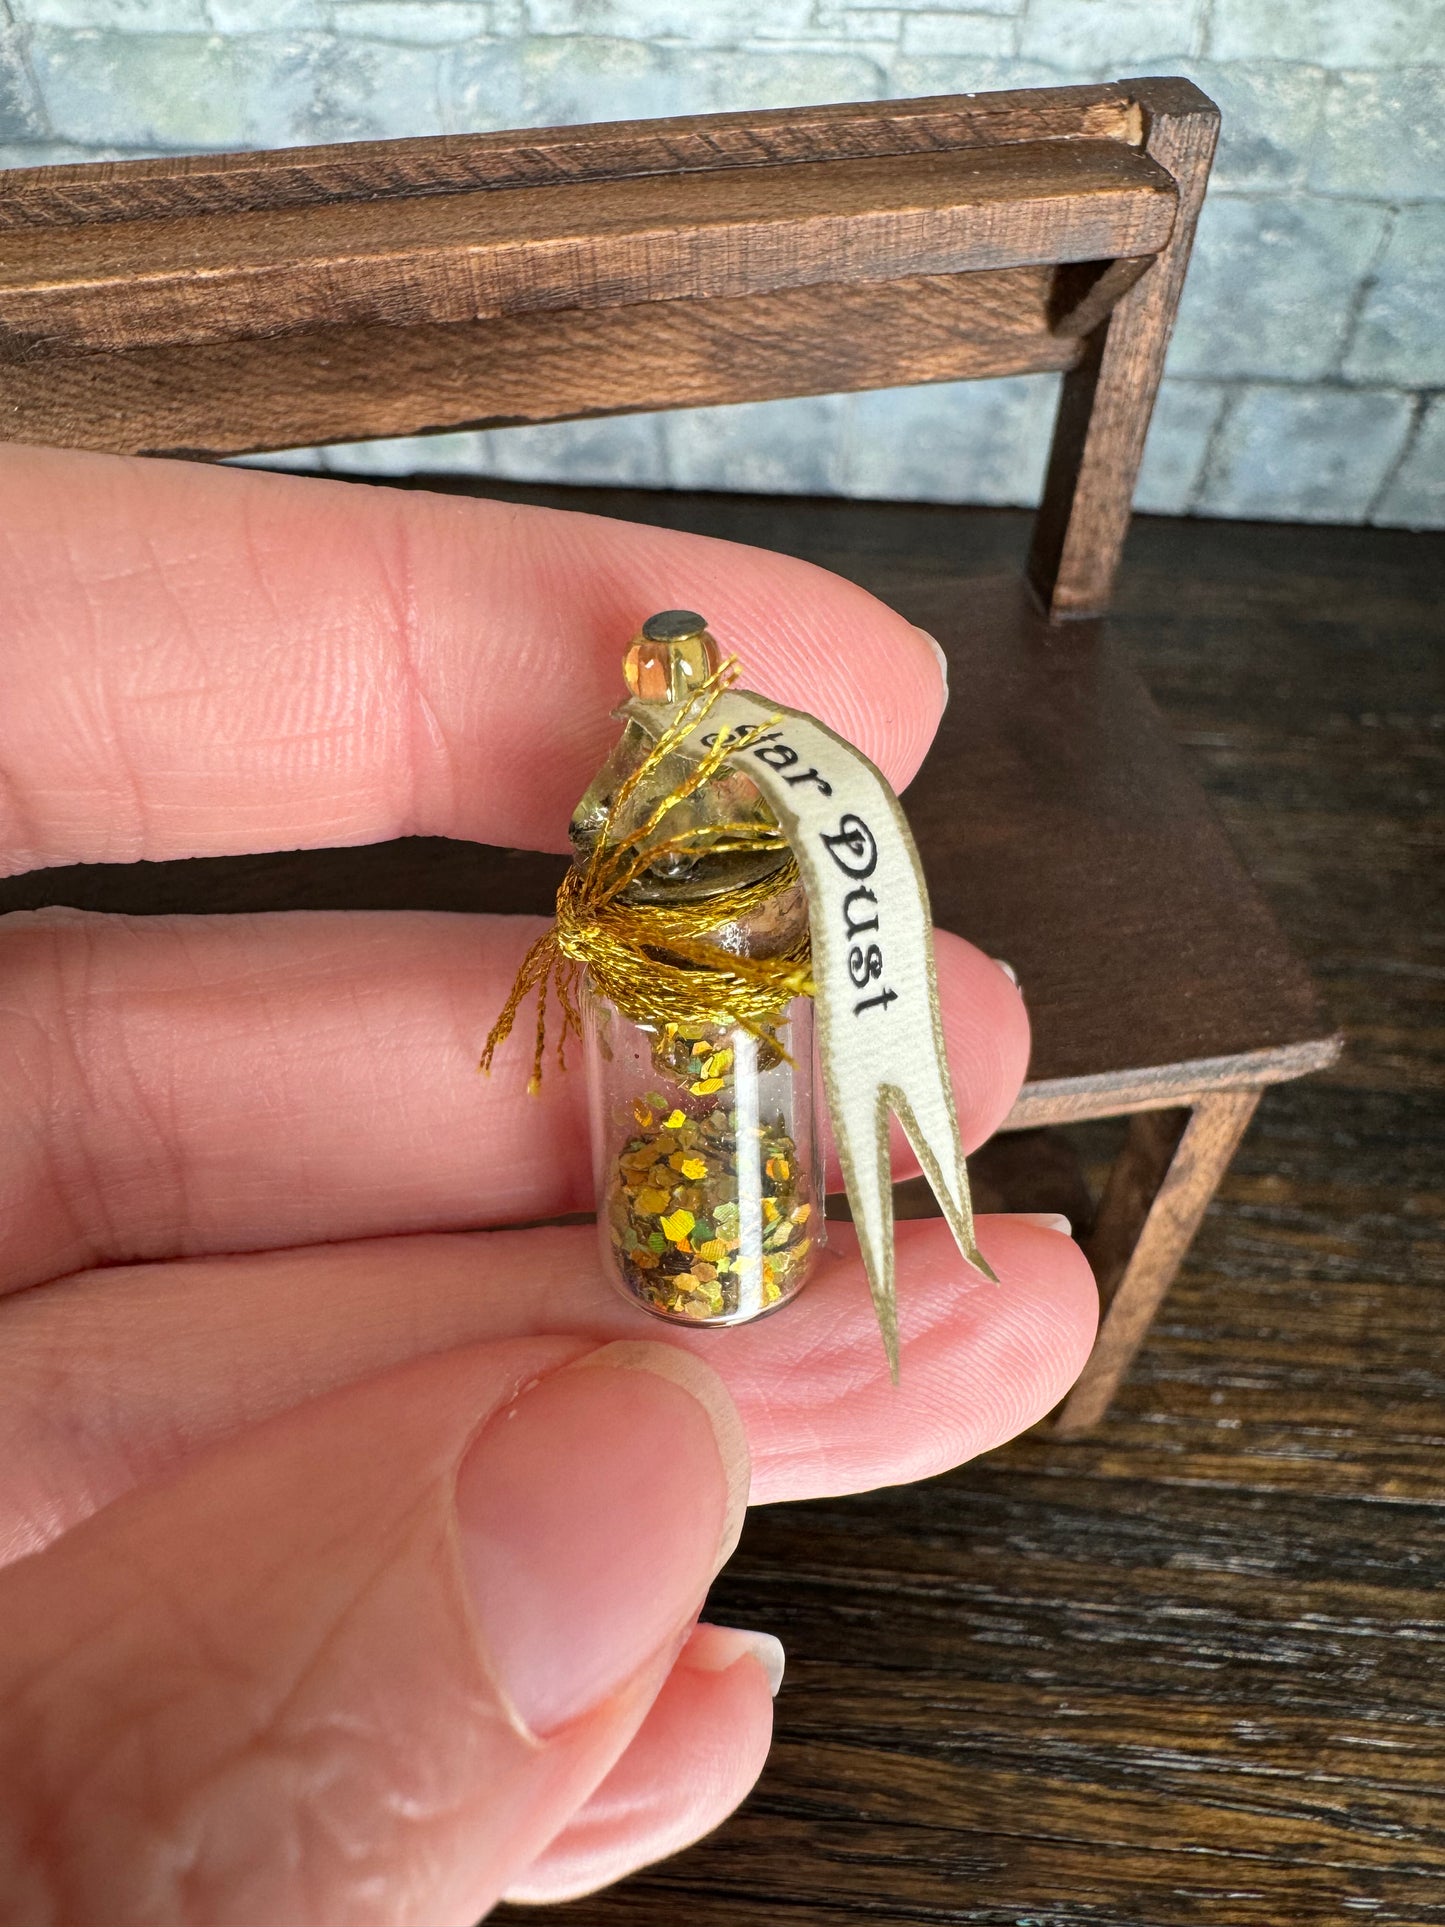 Star Dust Potion - 1:12 Scale